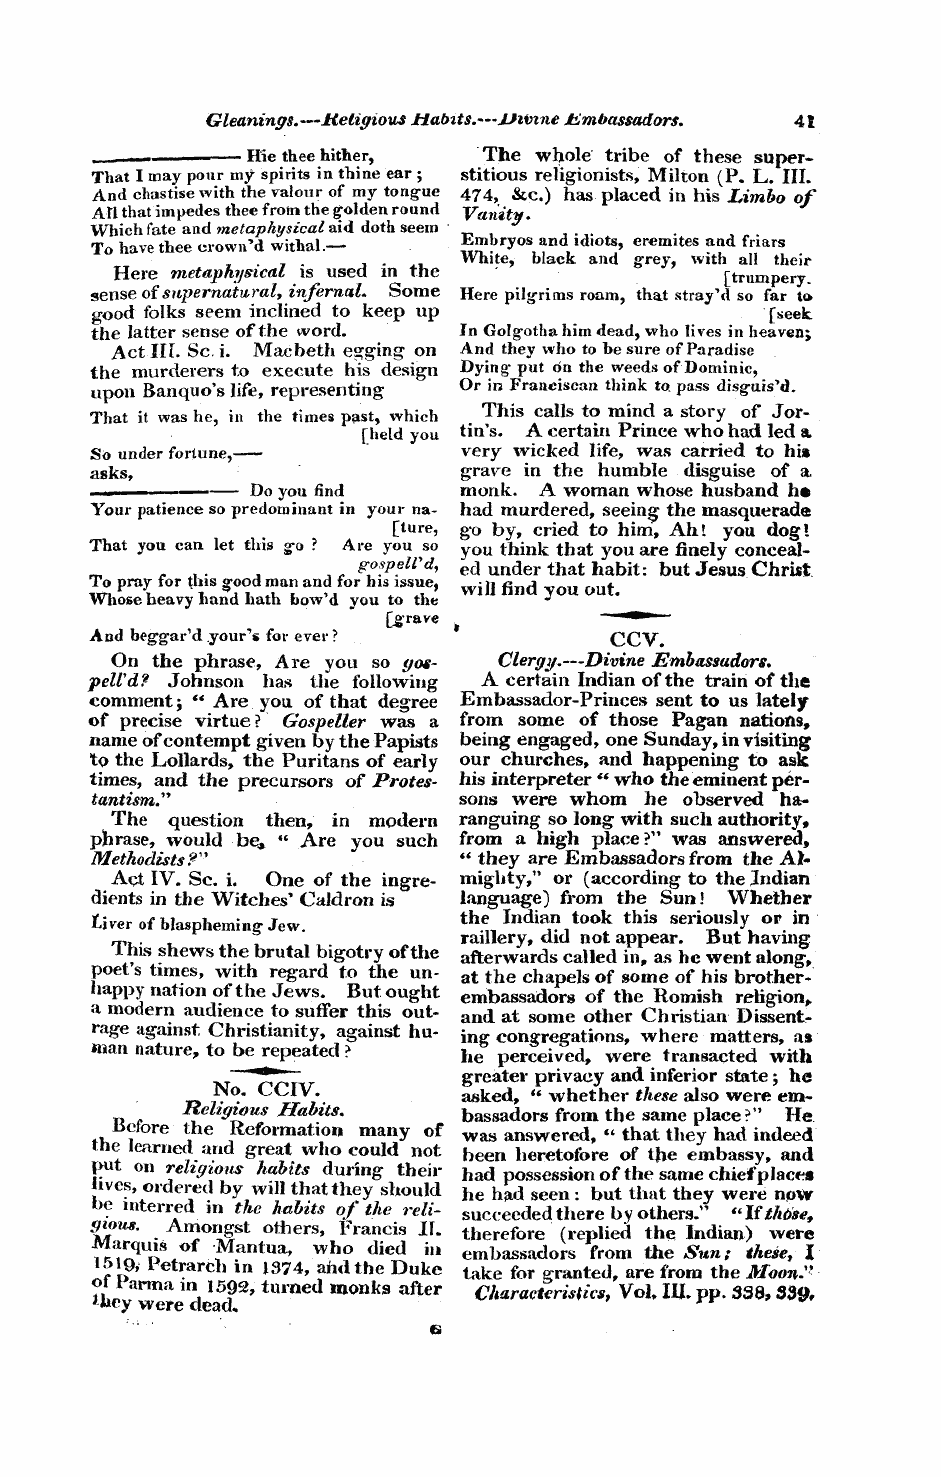 Monthly Repository (1806-1838) and Unitarian Chronicle (1832-1833): F Y, 1st edition: 41